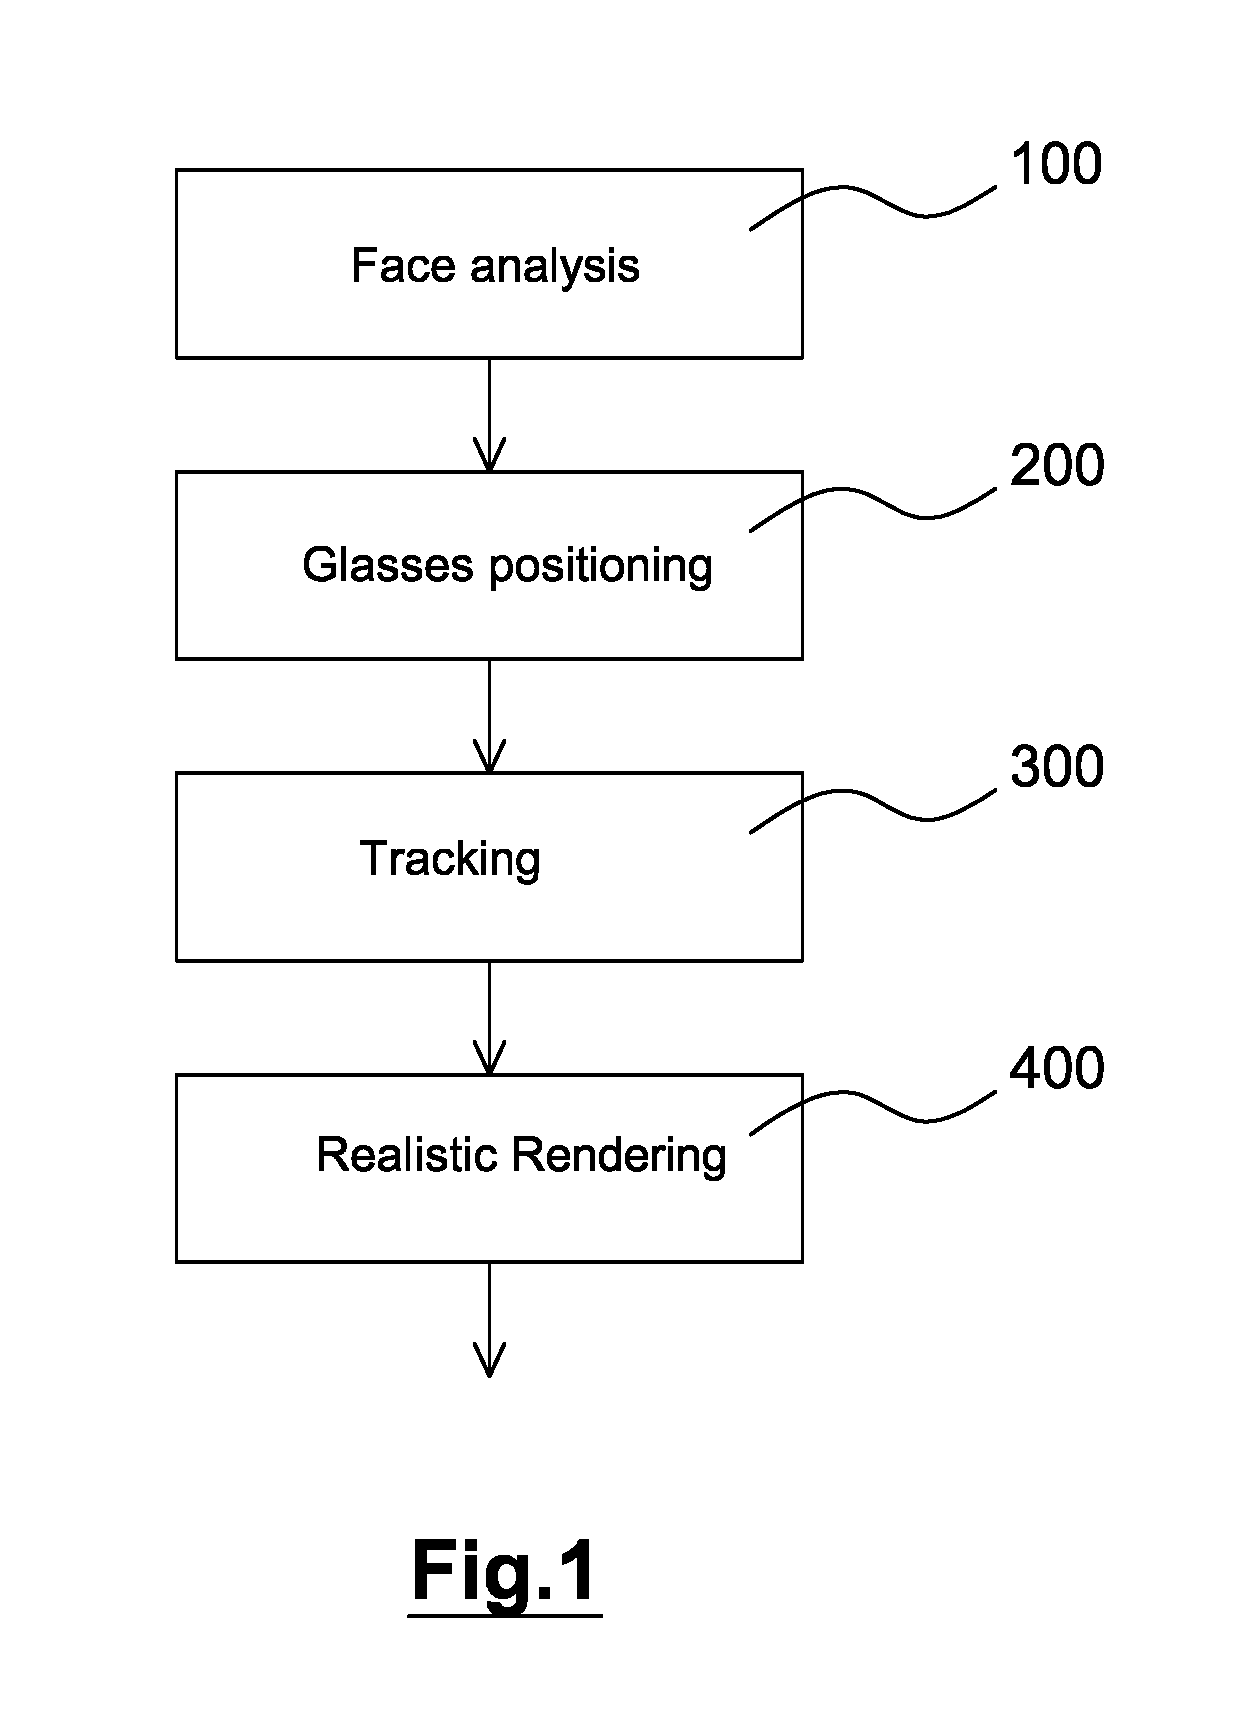 Process and method for real-time physically accurate and realistic-looking glasses try-on